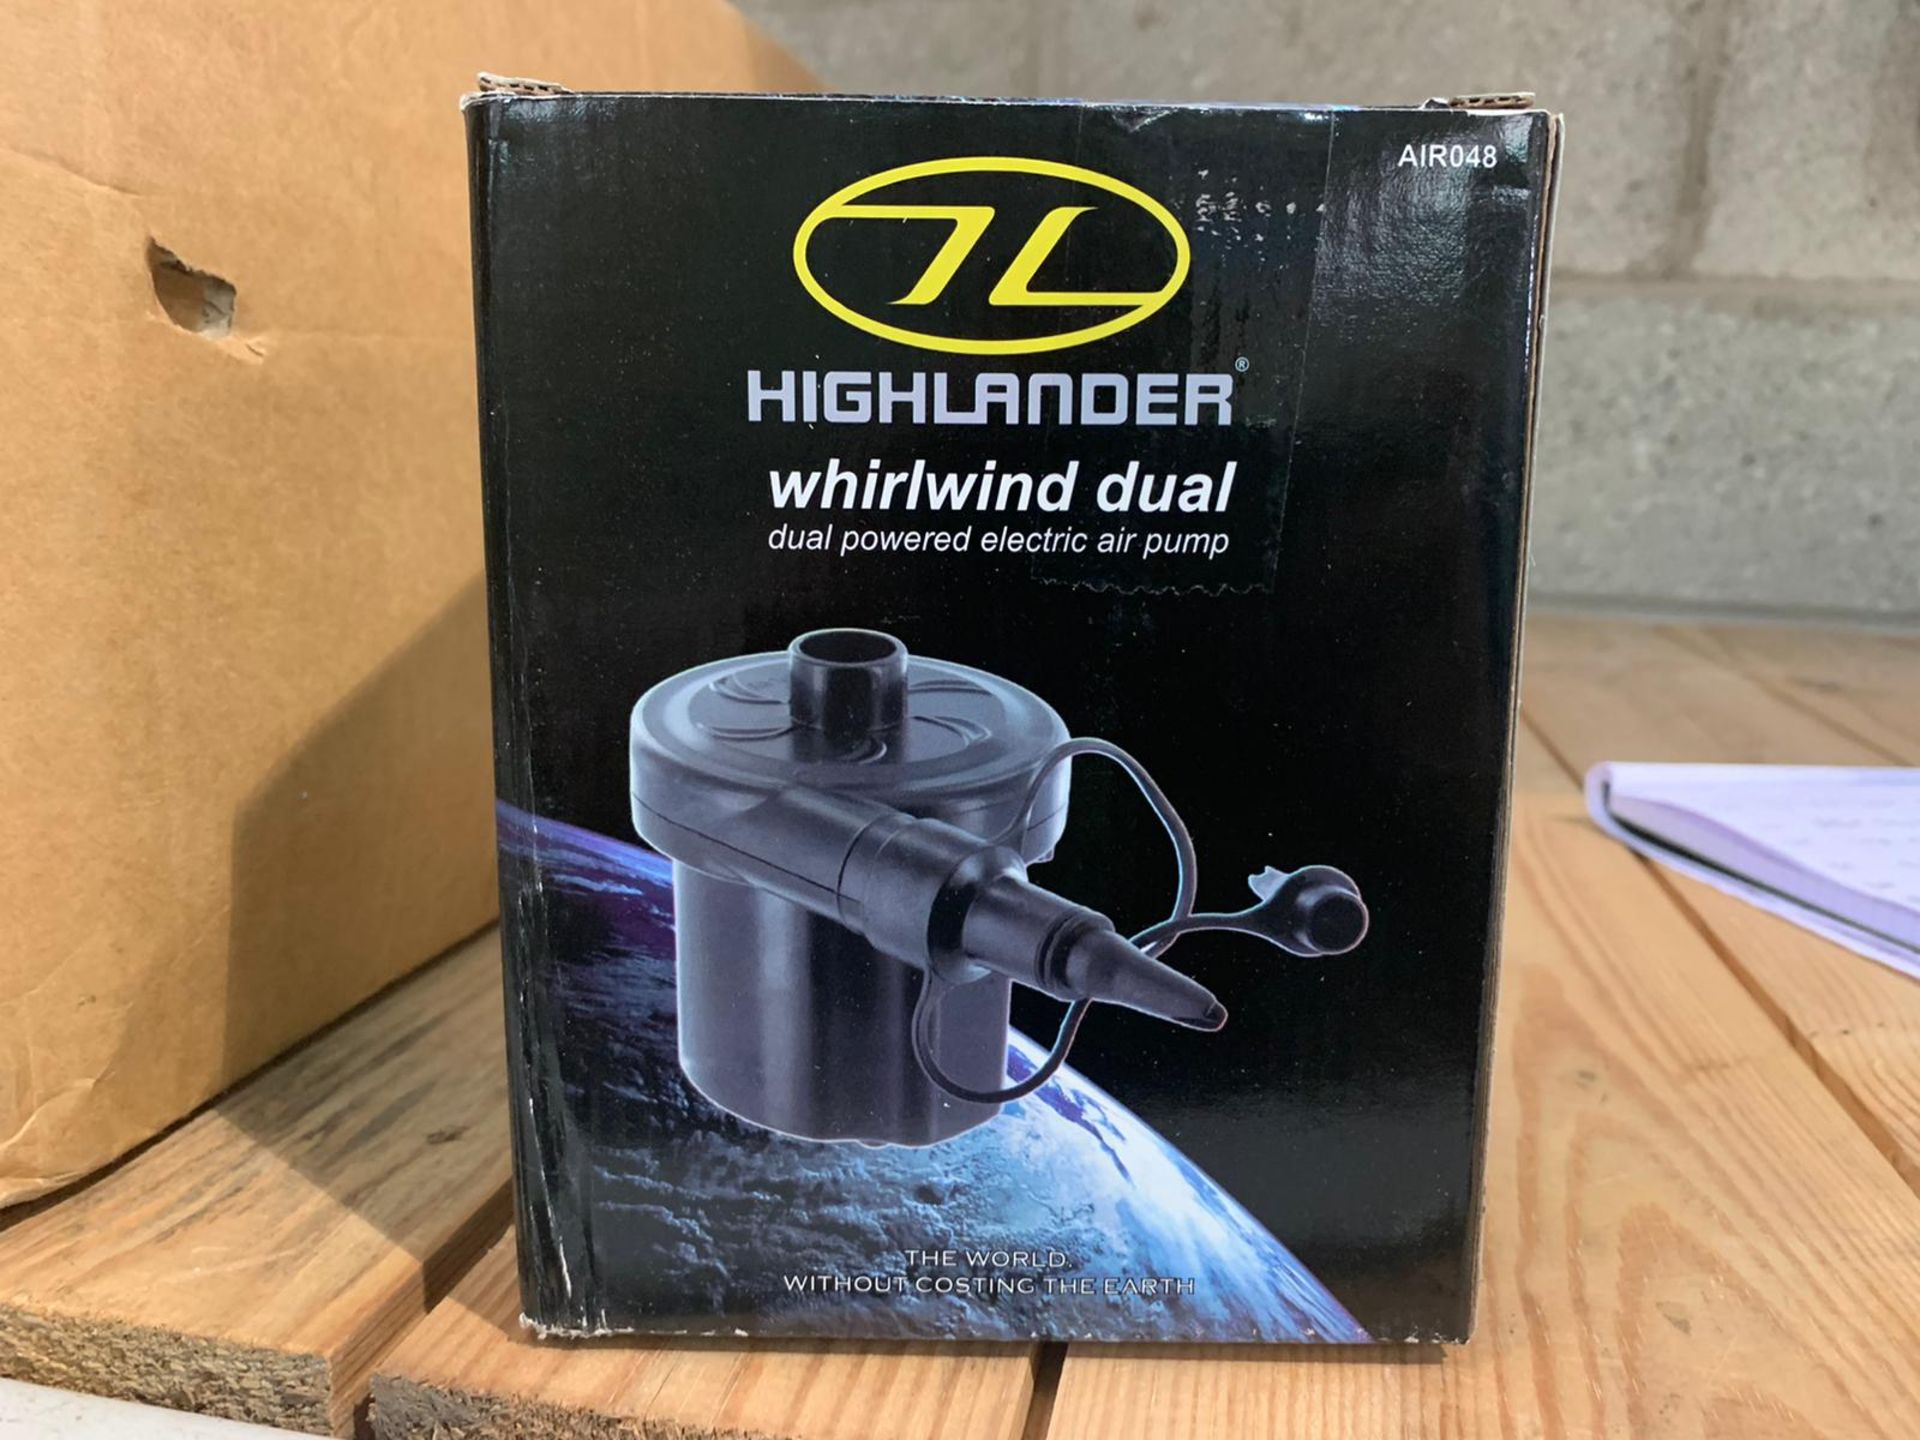 12 X BRAND NEW HIGHLANDER WHIRLWIND ELECTRICAL PUMPS